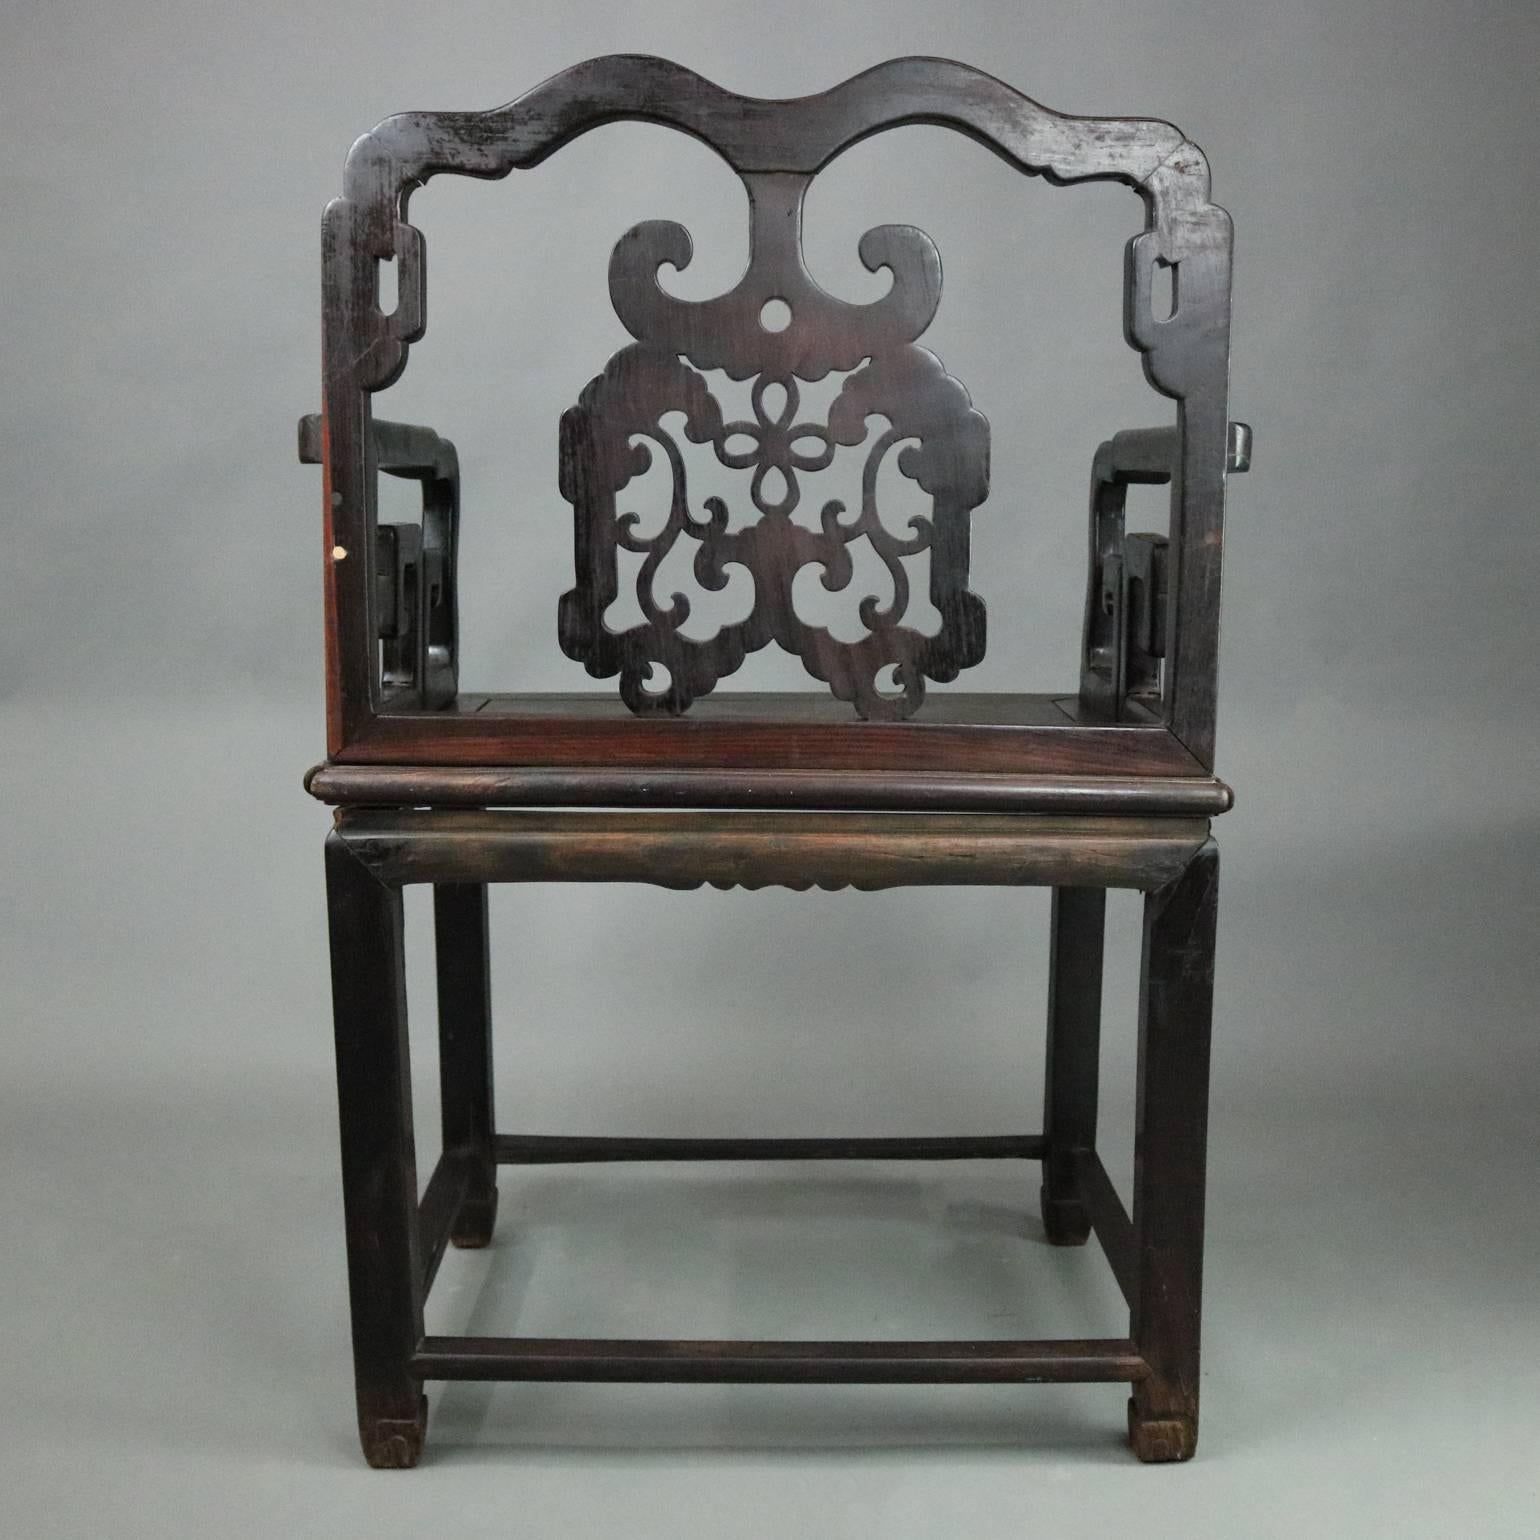 Antique Chinese throne chair features ebonized carved hardwood with pierced back with scroll and foliate floral design, circa 1890.

Measures: 38.75